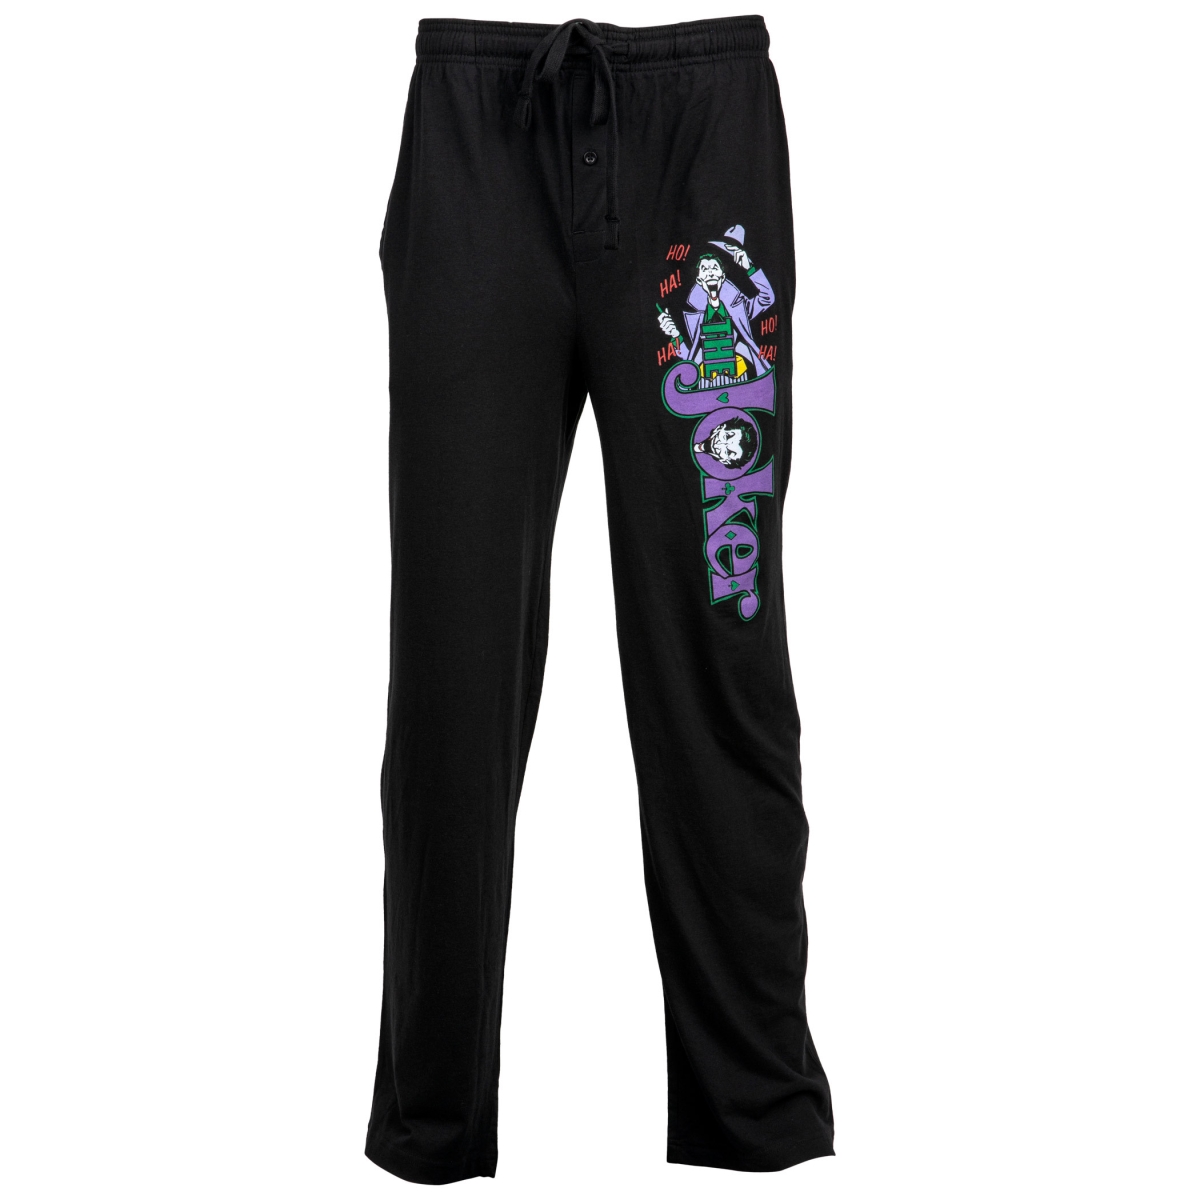 Picture of Joker 810754-xlarge 40-42 The Joker Character Over Text Unisex Sleep Pants, Extra Large 40-42